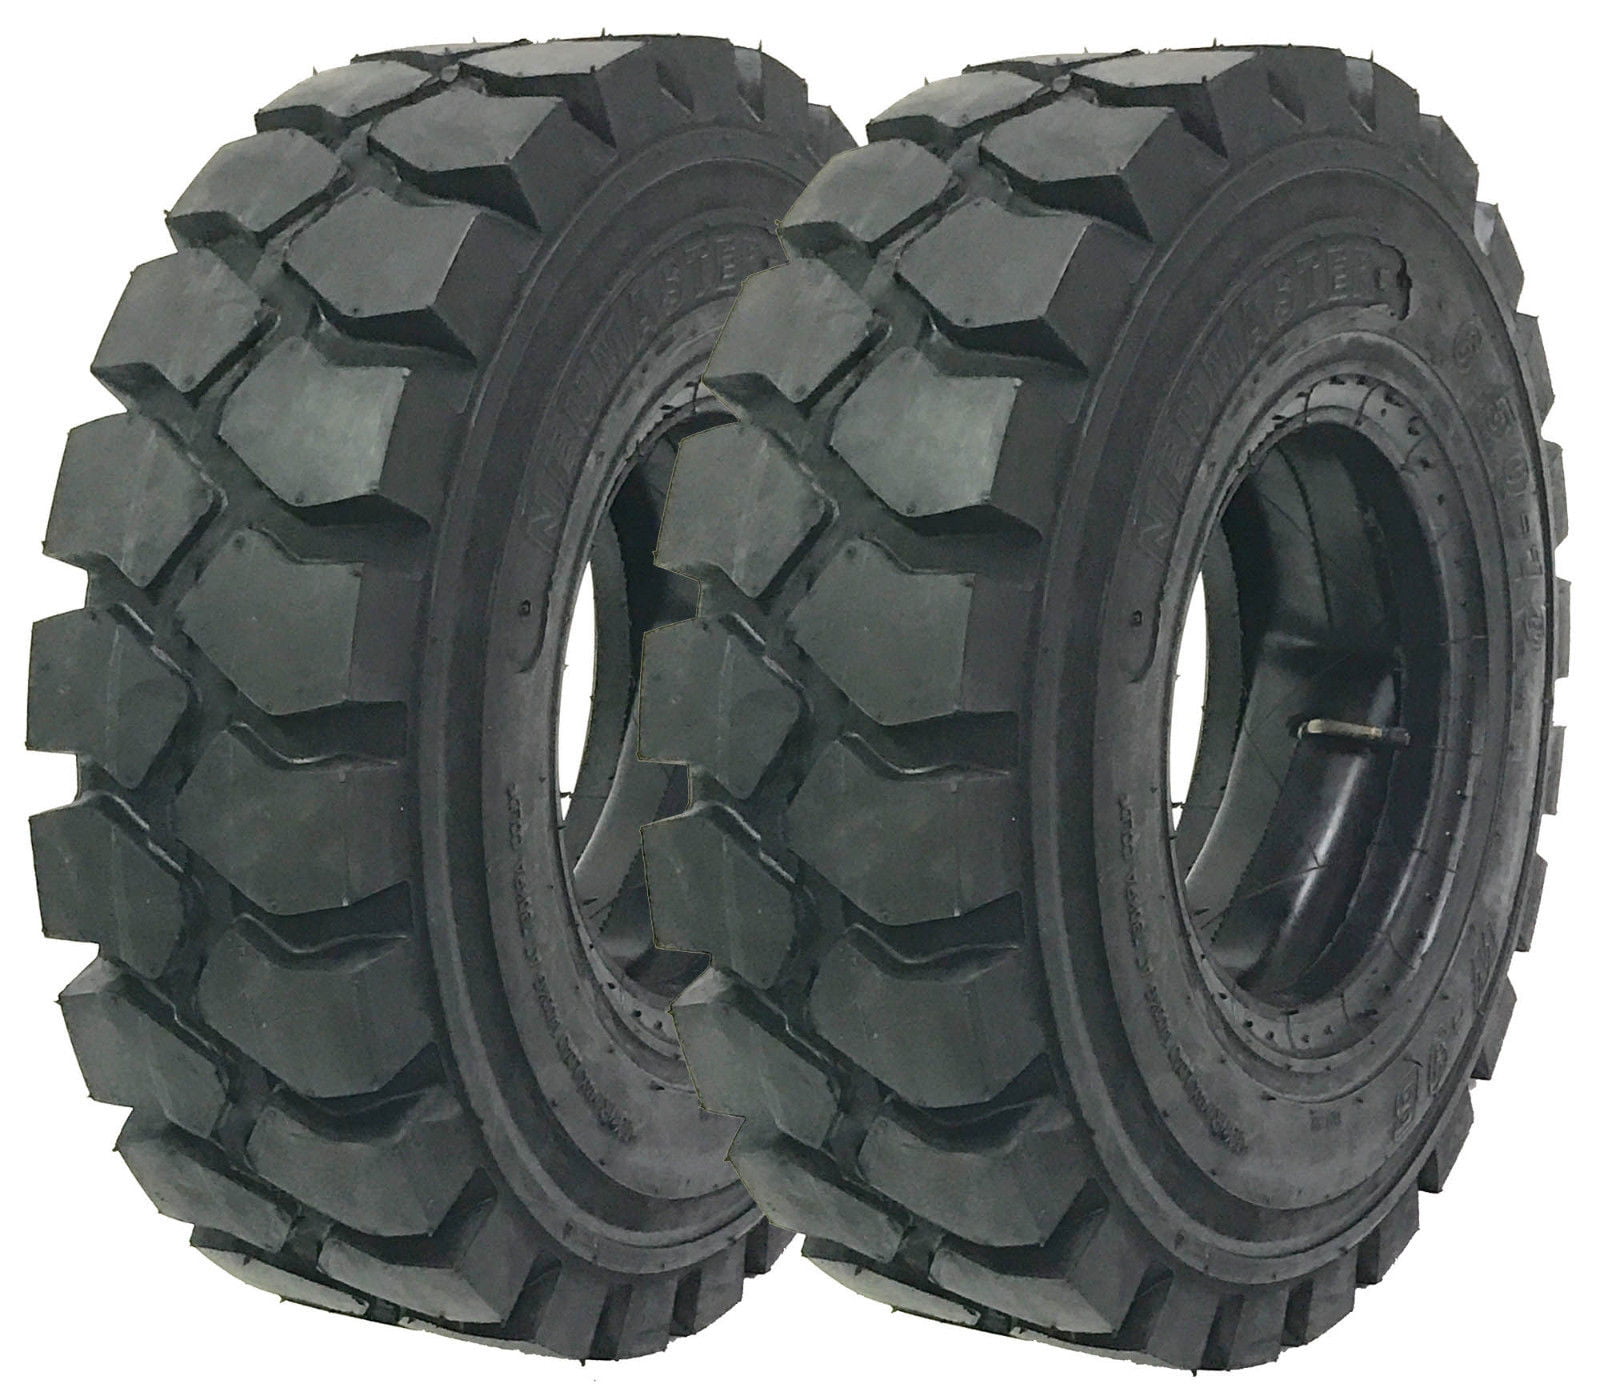 TWO New 7.00-12 FORKLIFT TIRE With Tubes Flap Grip Plus Heavy duty 700-12 